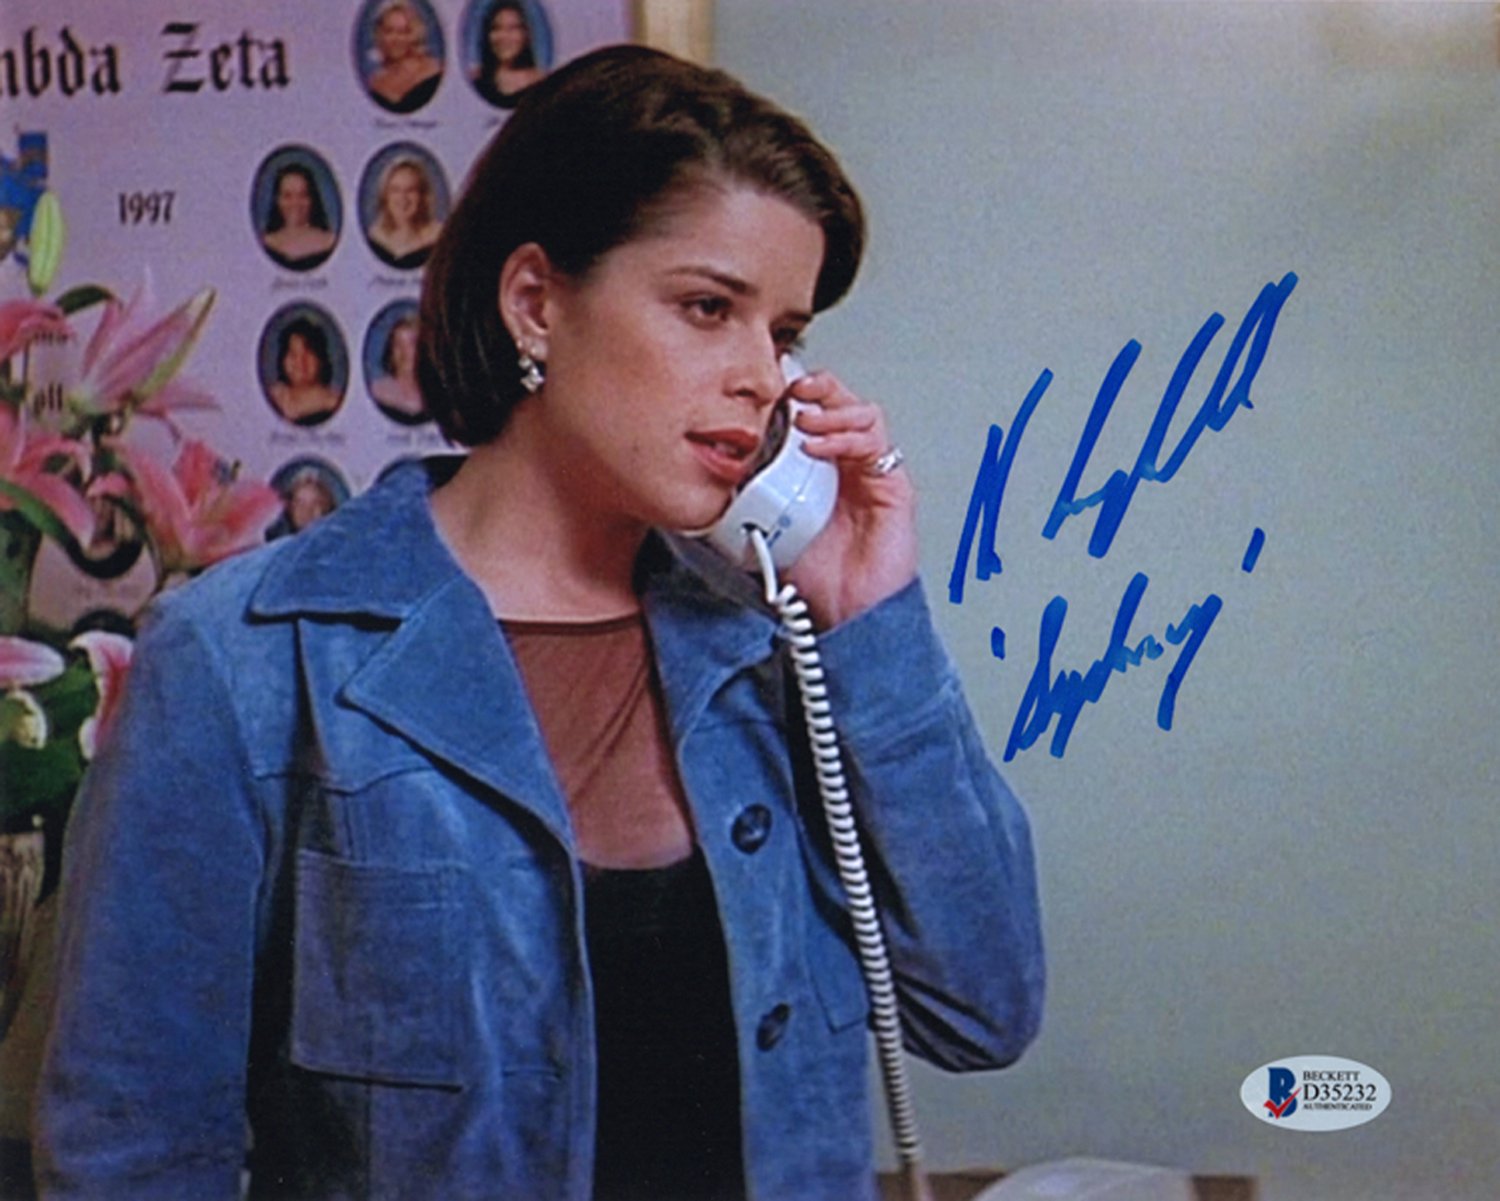 Neve Campbell Scream signed & mounted 8 x 10" Glossy Autographed Photo (Reprint:606)